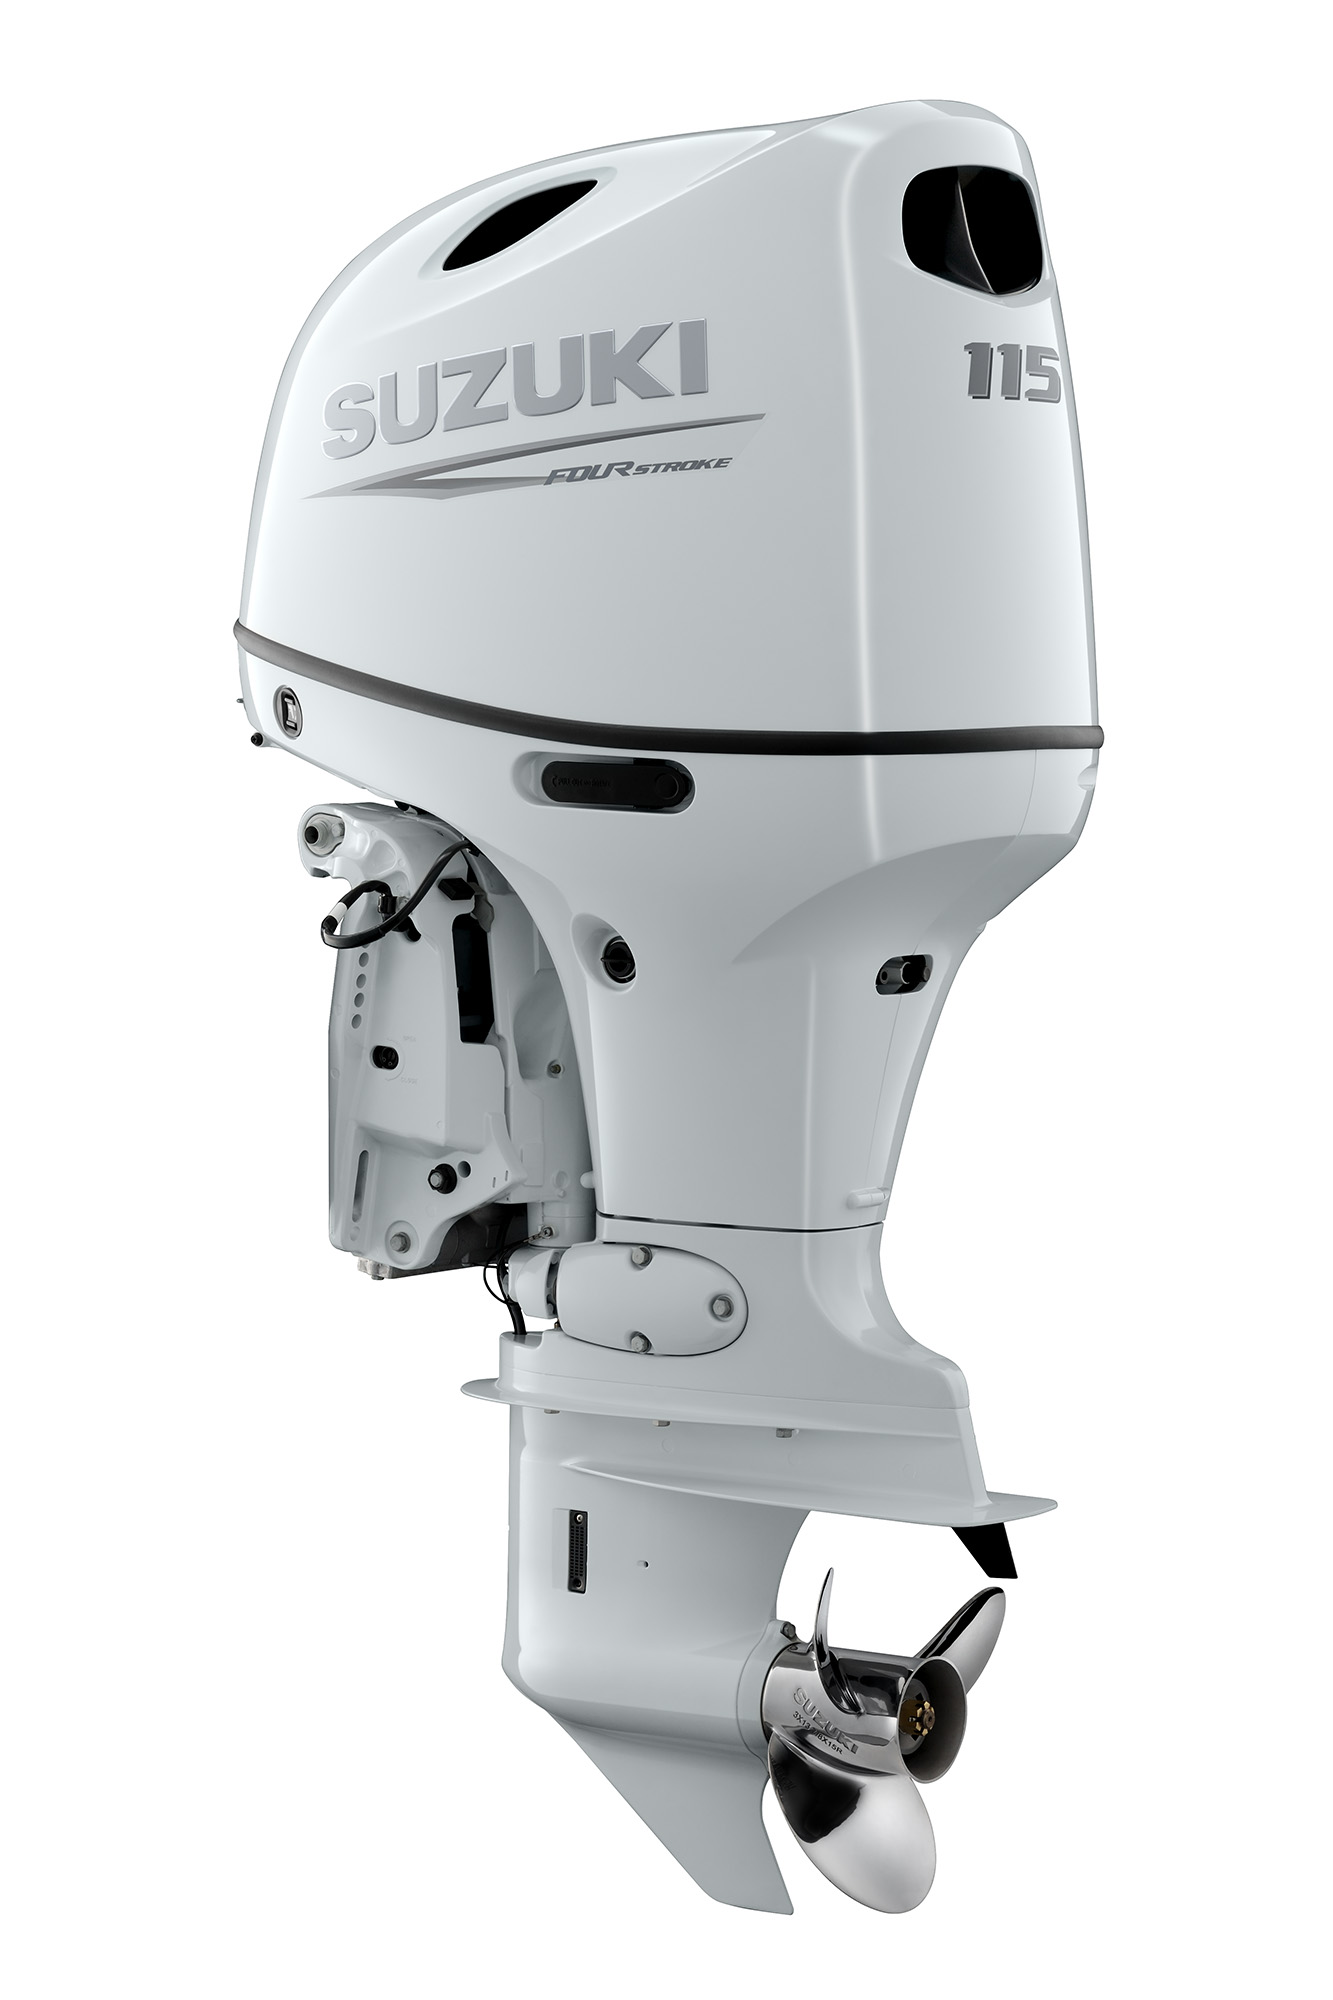 Suzuki's DF140BG and DF115BG Outboards Receive 2021 Boating Industry